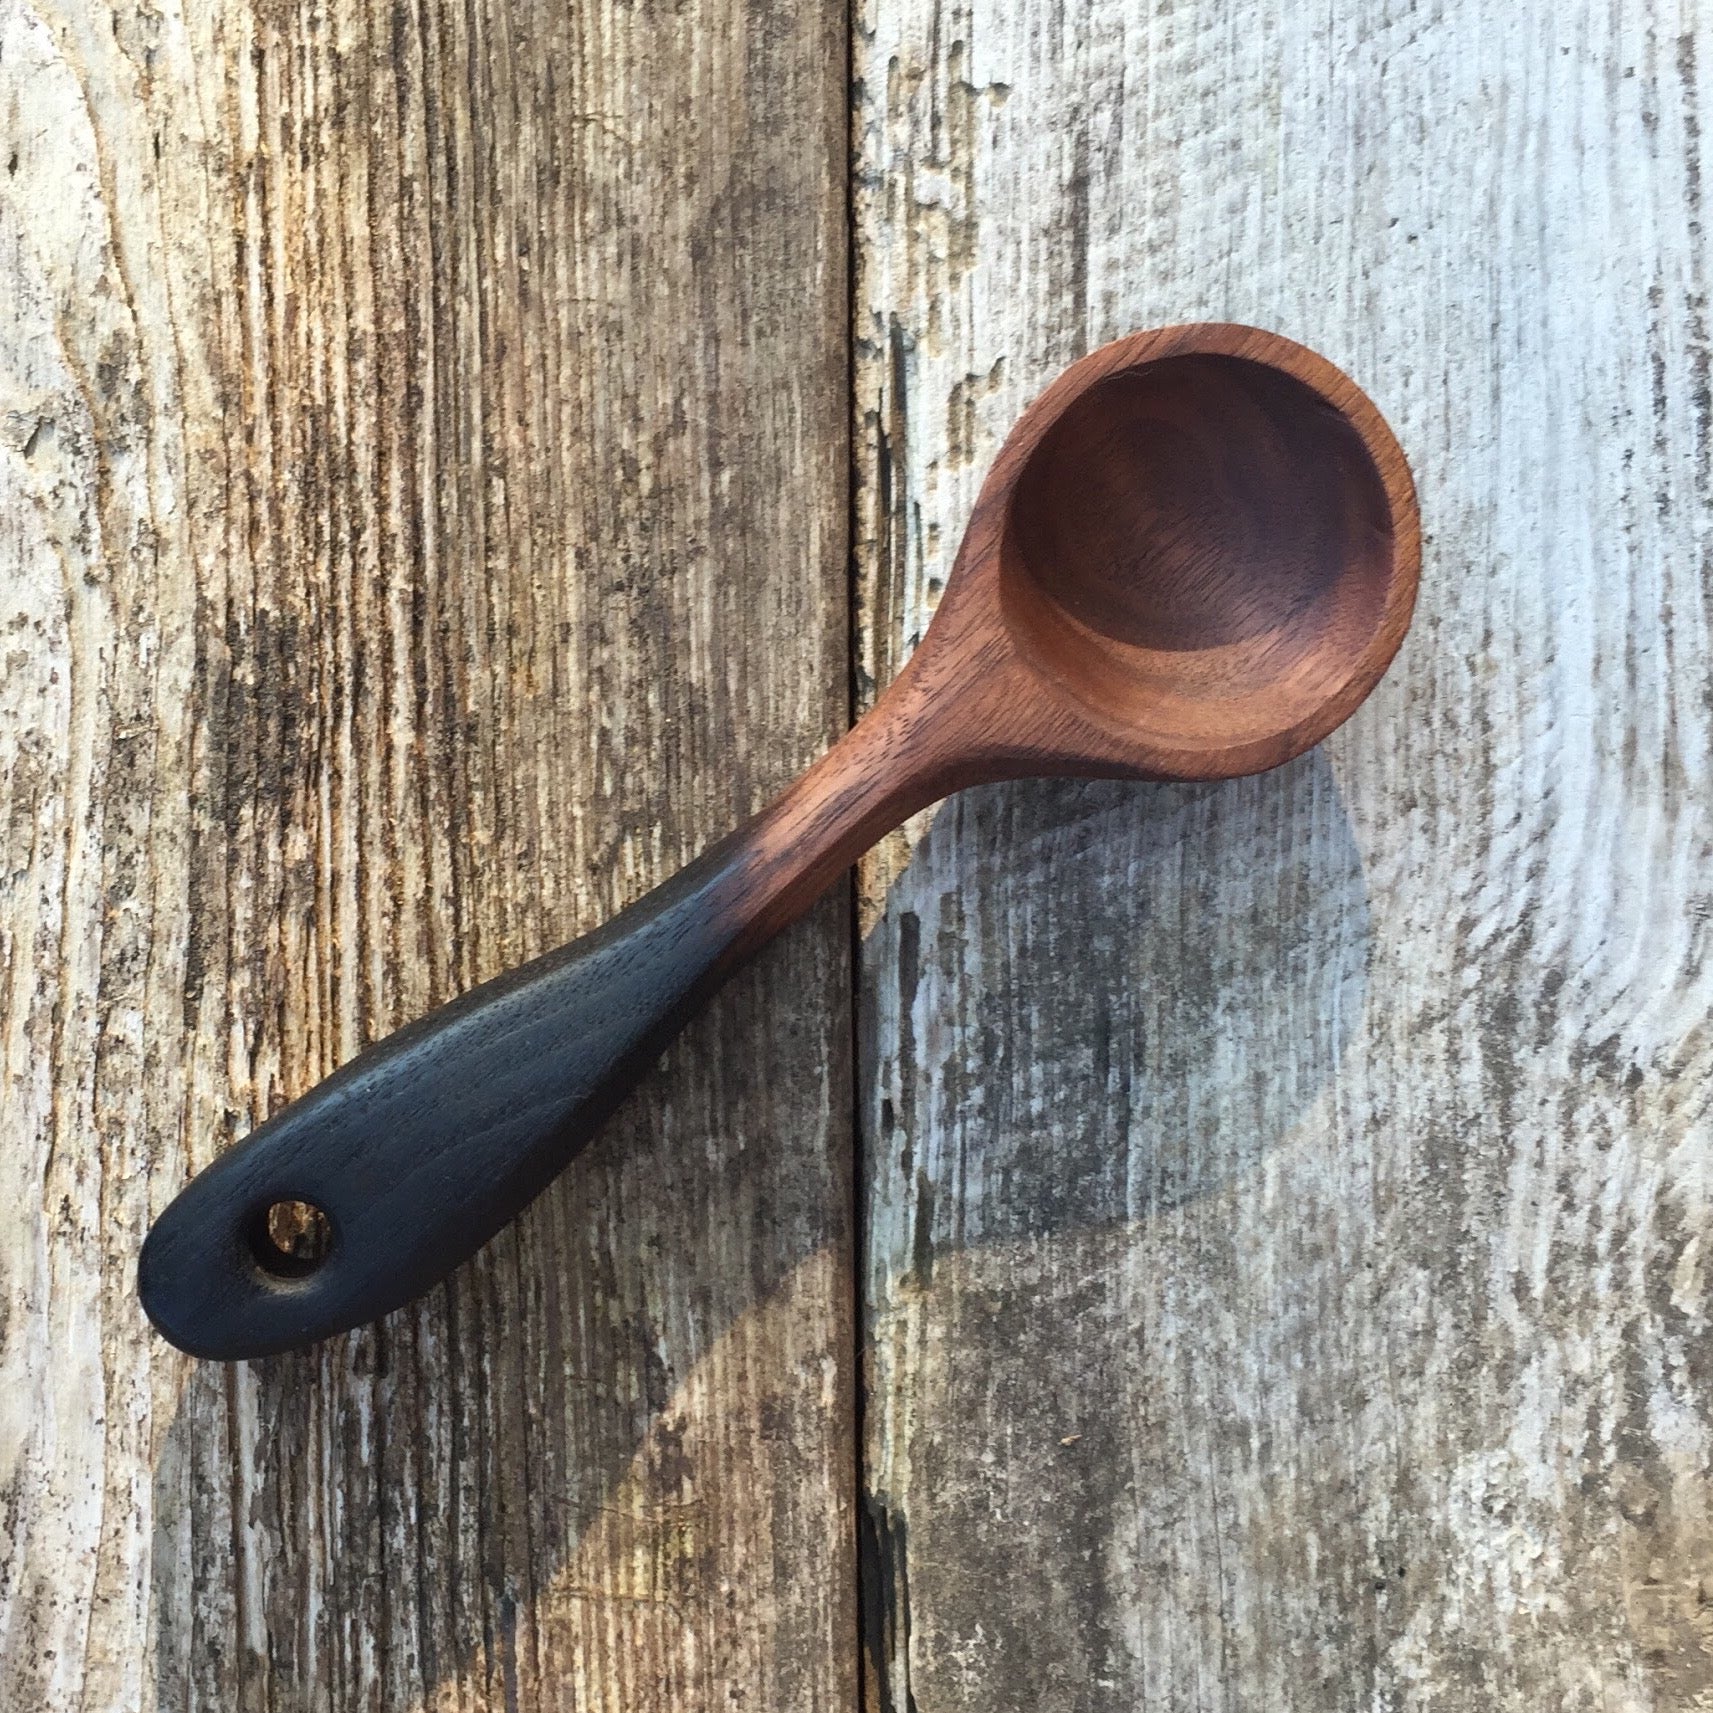 Scoop with Charred Handle